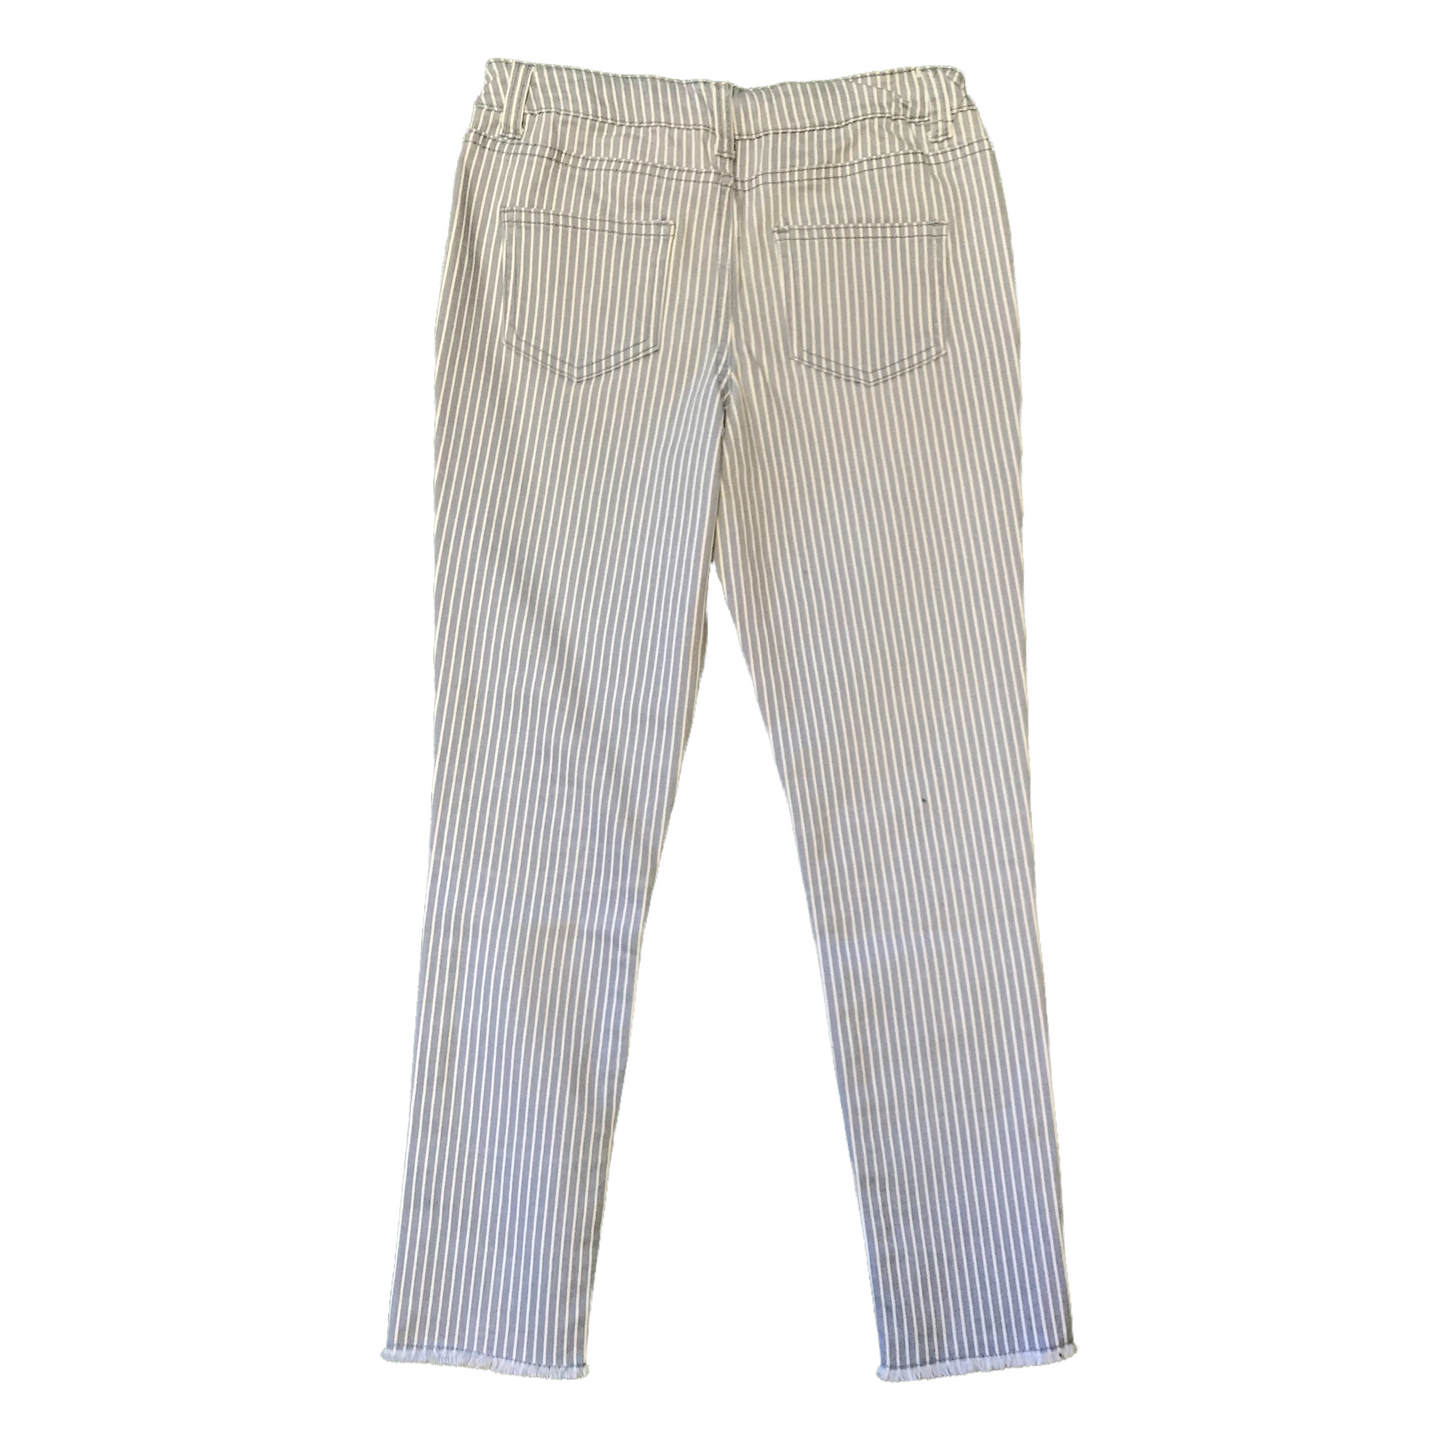 Primark Light Blue and White Stripy Stretchy Jeans Age 8